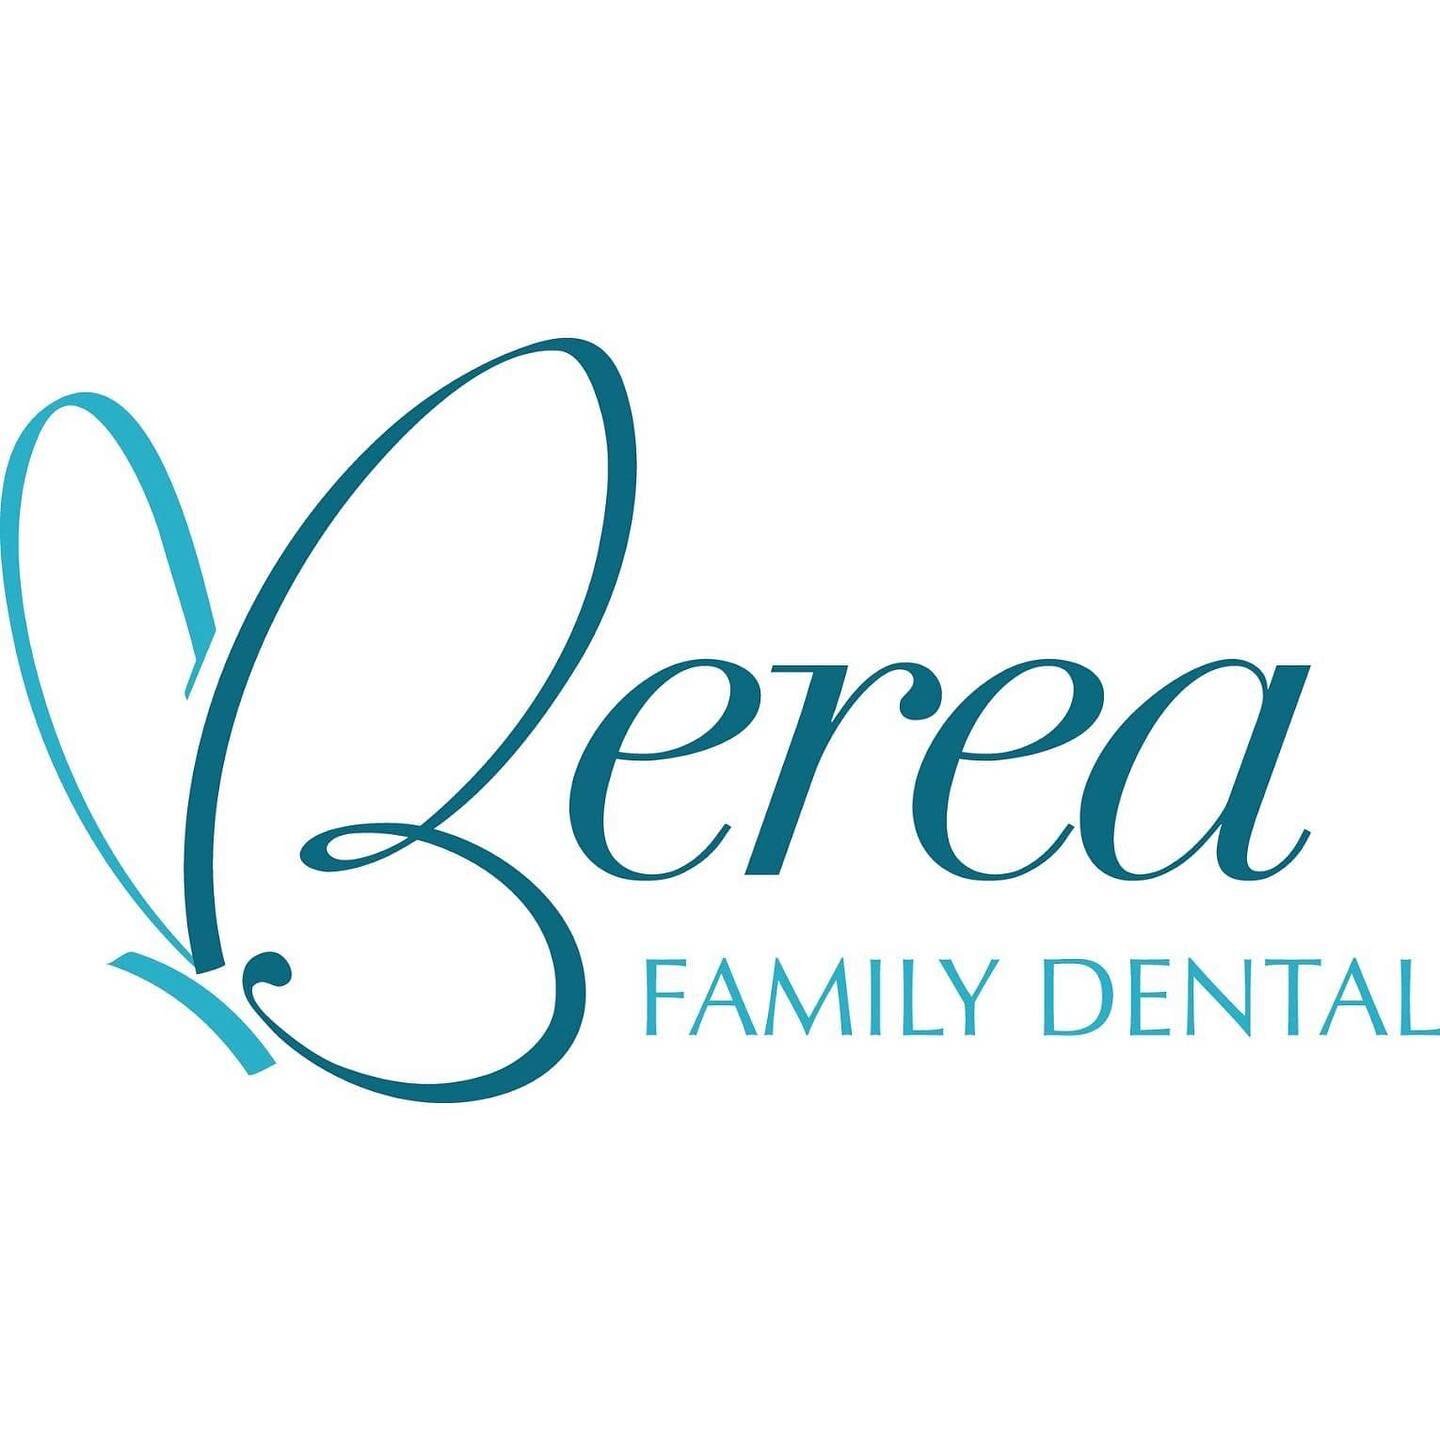 We have another MATCHING SPONSOR!  Berea Family Dental will match all donations made from 2-4 p.m. up to $1,000. Can we do it?! Thanks to Berea Family Dental and the Buckley Family for sponsoring.